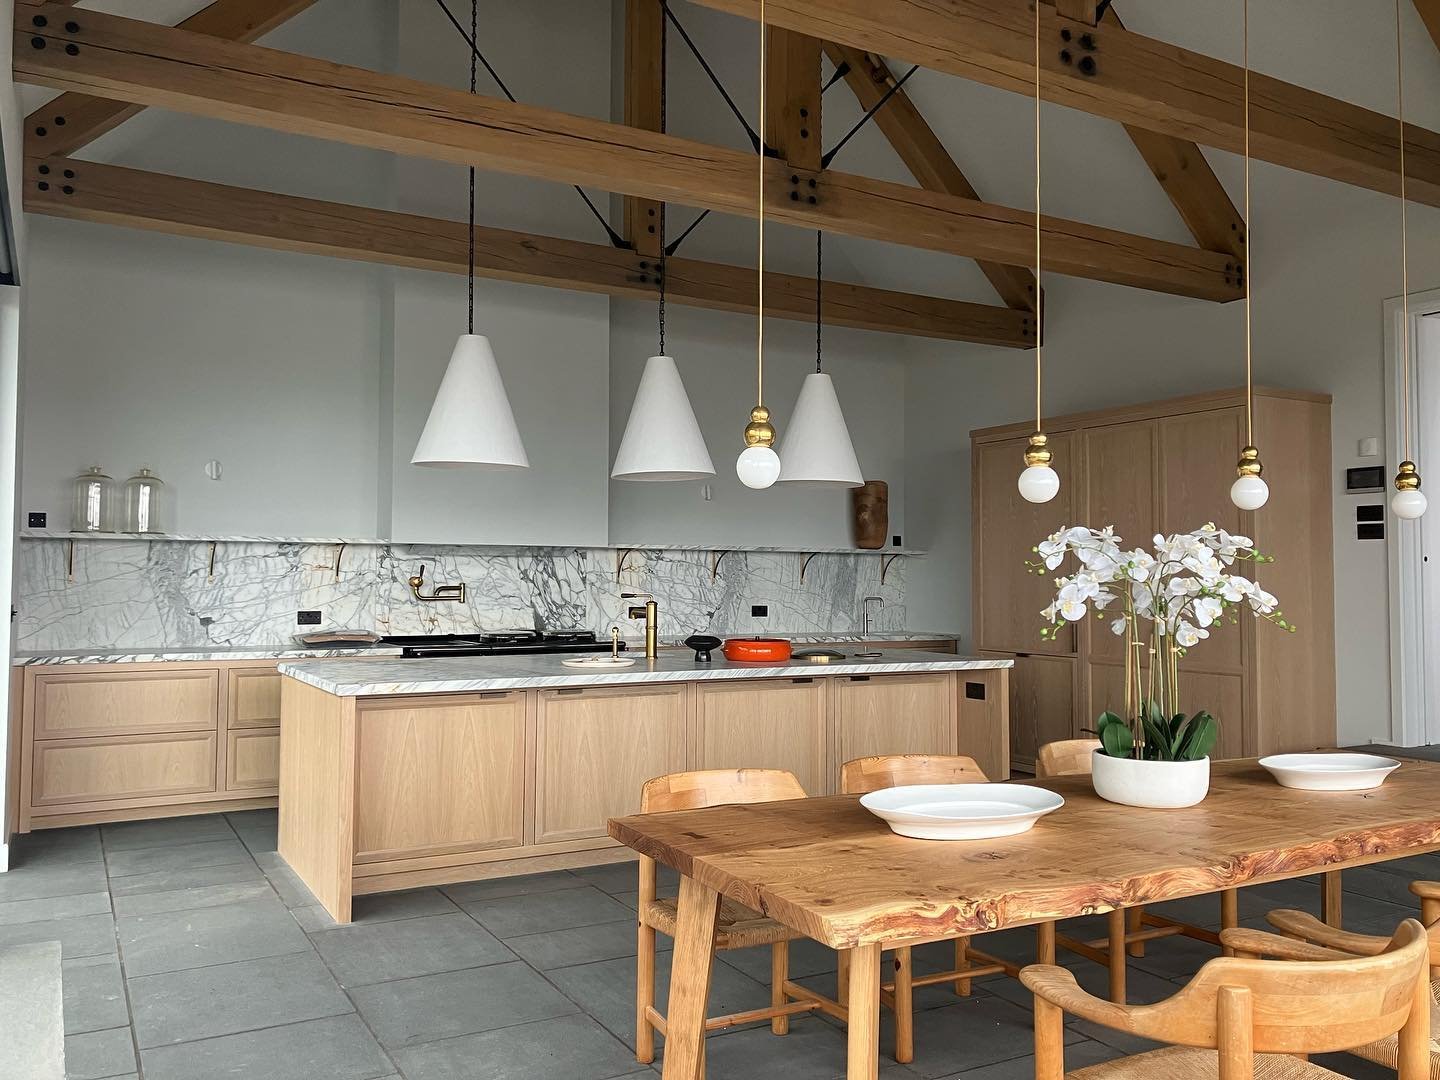 The beauty of a handmade bespoke kitchen means that you have a kitchen space that is designed and built specifically for your needs and lifestyle and very inch is maximised for functionality with no wasted space or filler pieces. 
From custom storage